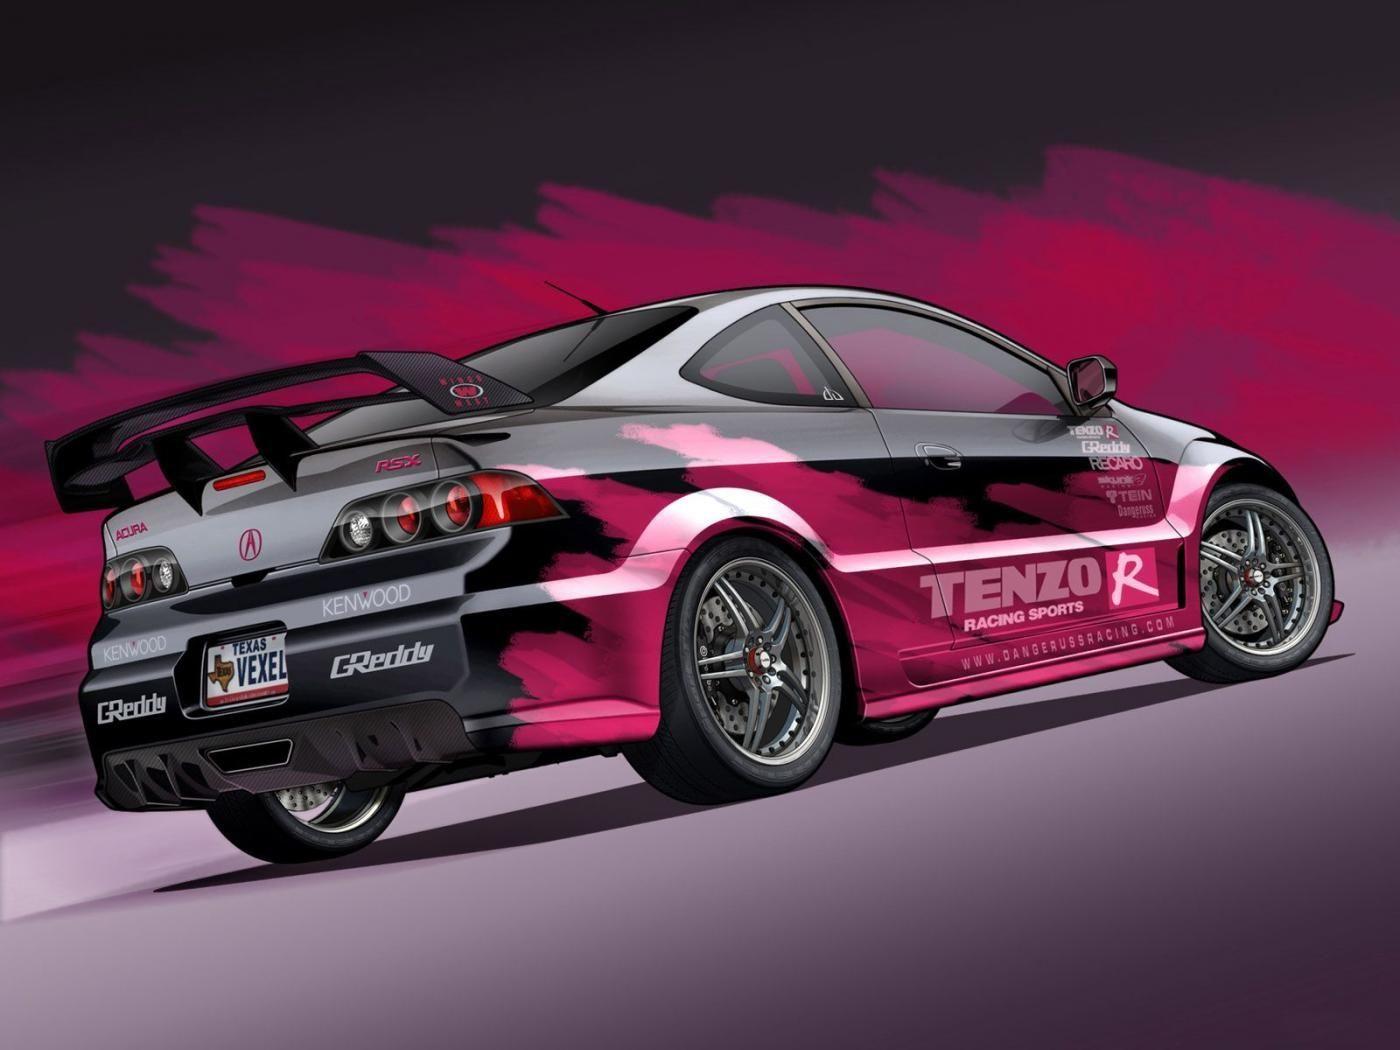 Awesome Acura RSX Modified Wallpaper. Cars i want. Car